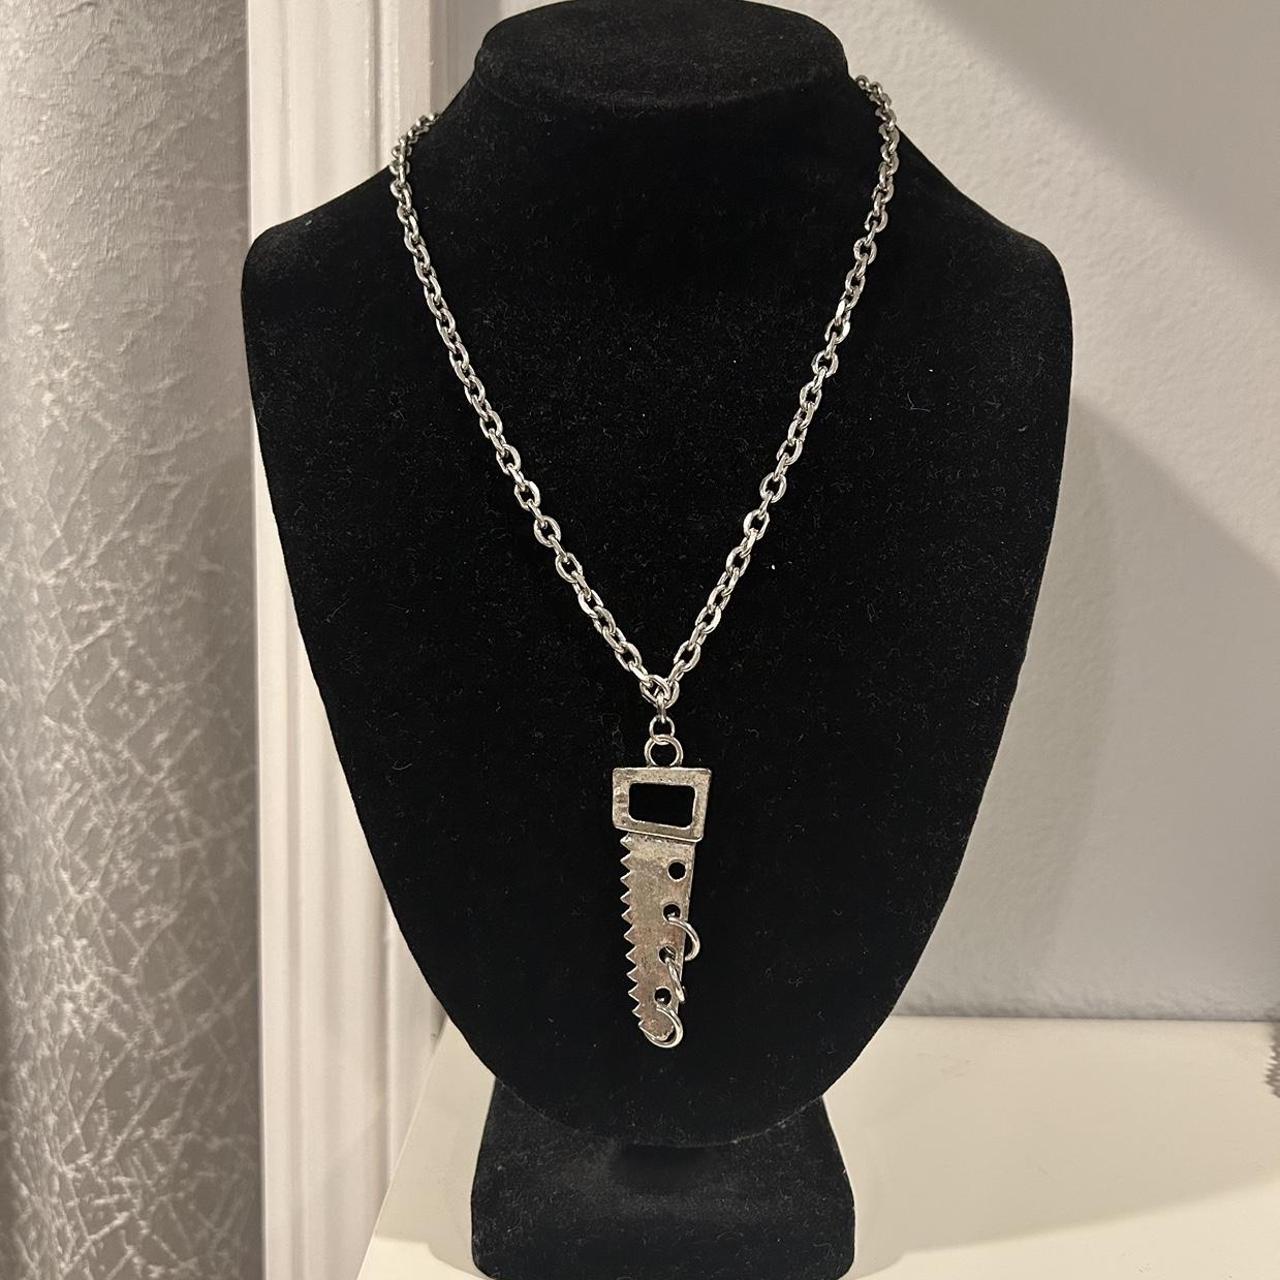 silver-colored saw necklace 🪚⛓️, NEVER WORN BEFORE